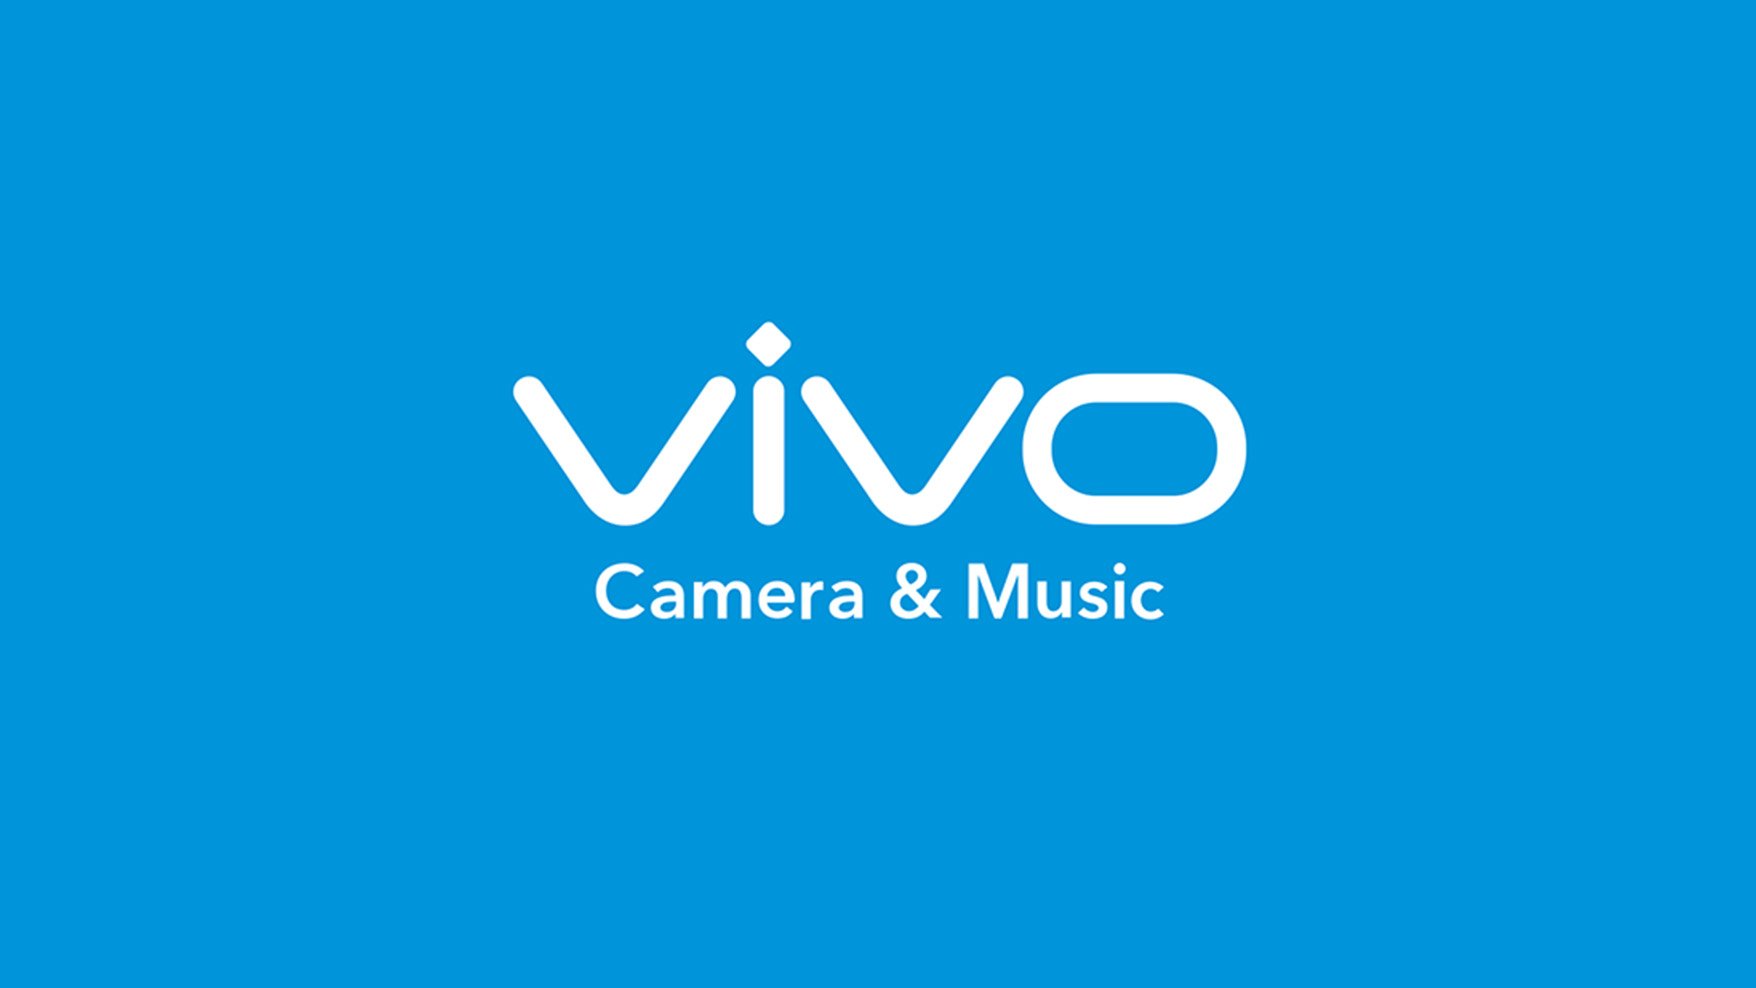 Vivo secures a spot in the top 5 mobile phone brand worldwide - Jam